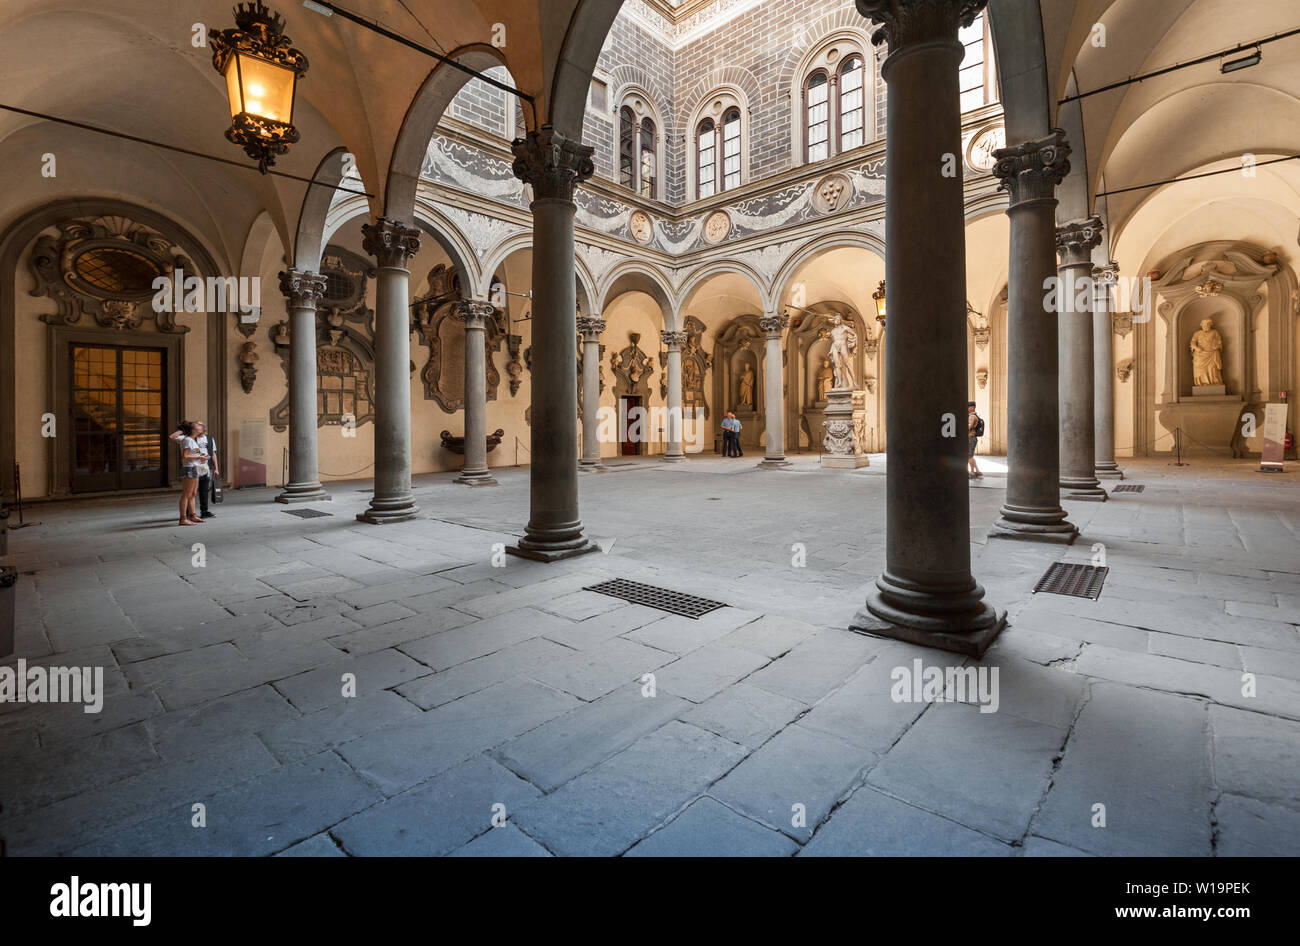 Florence, Tuscany, Italy- June, 2019: the courtyard of the Palazzo Medici Riccardi, designed by Michelozzo di Bartolomeo and built between 1444 and 14 Stock Photo